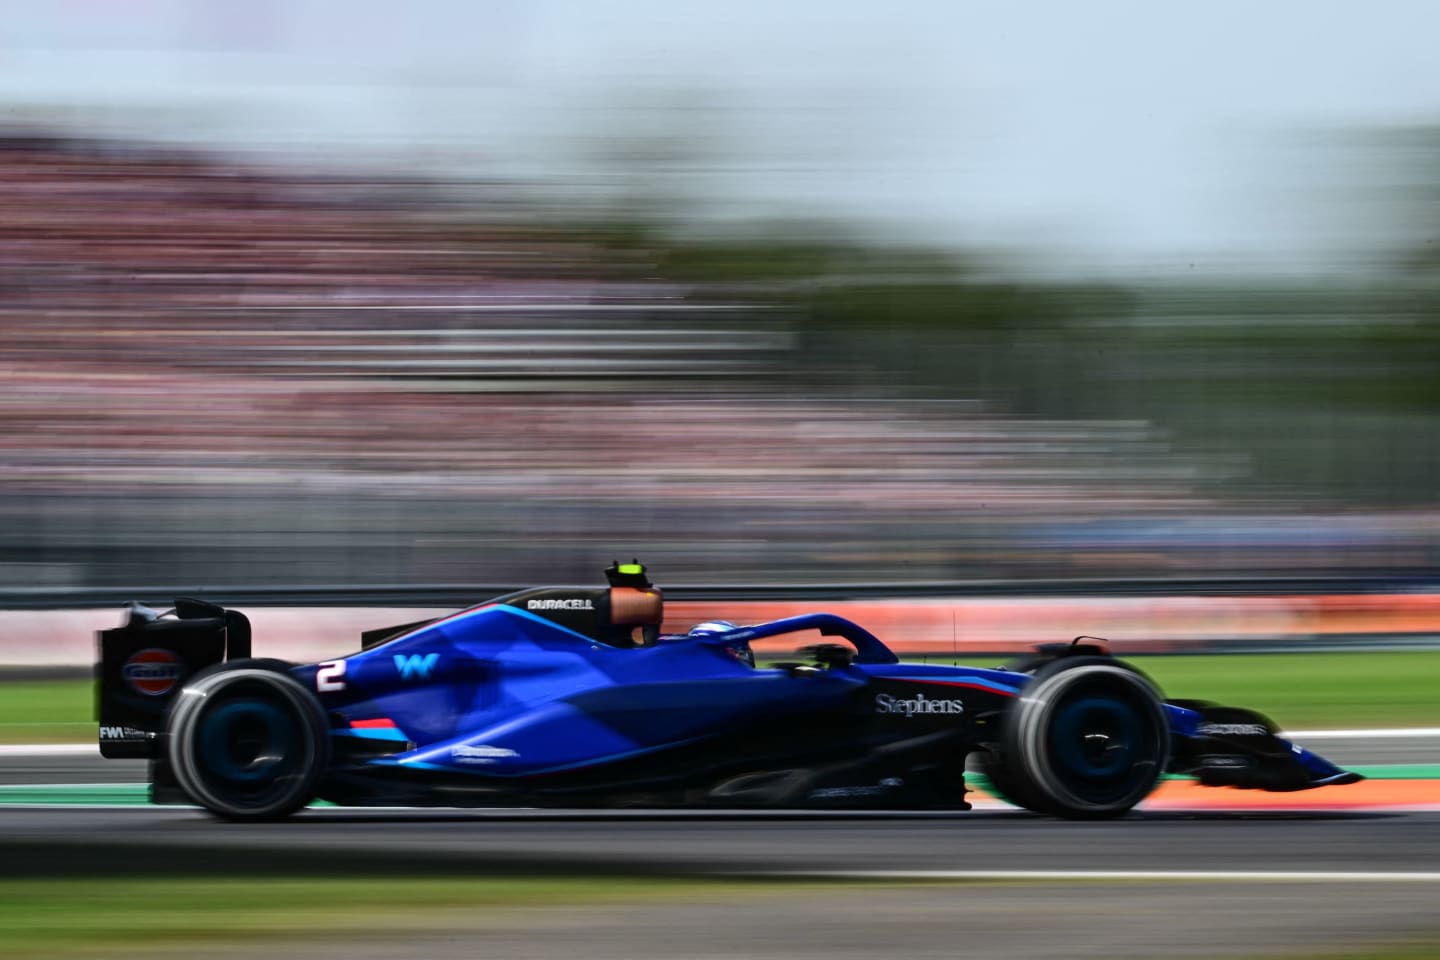 Williams' US driver Logan Sargeant drives during the Italian Formula One Grand Prix race at Autodromo Nazionale Monza circuit, in Monza on September 3, 2023. (Photo by Ben Stansall / AFP) (Photo by BEN STANSALL/AFP via Getty Images)